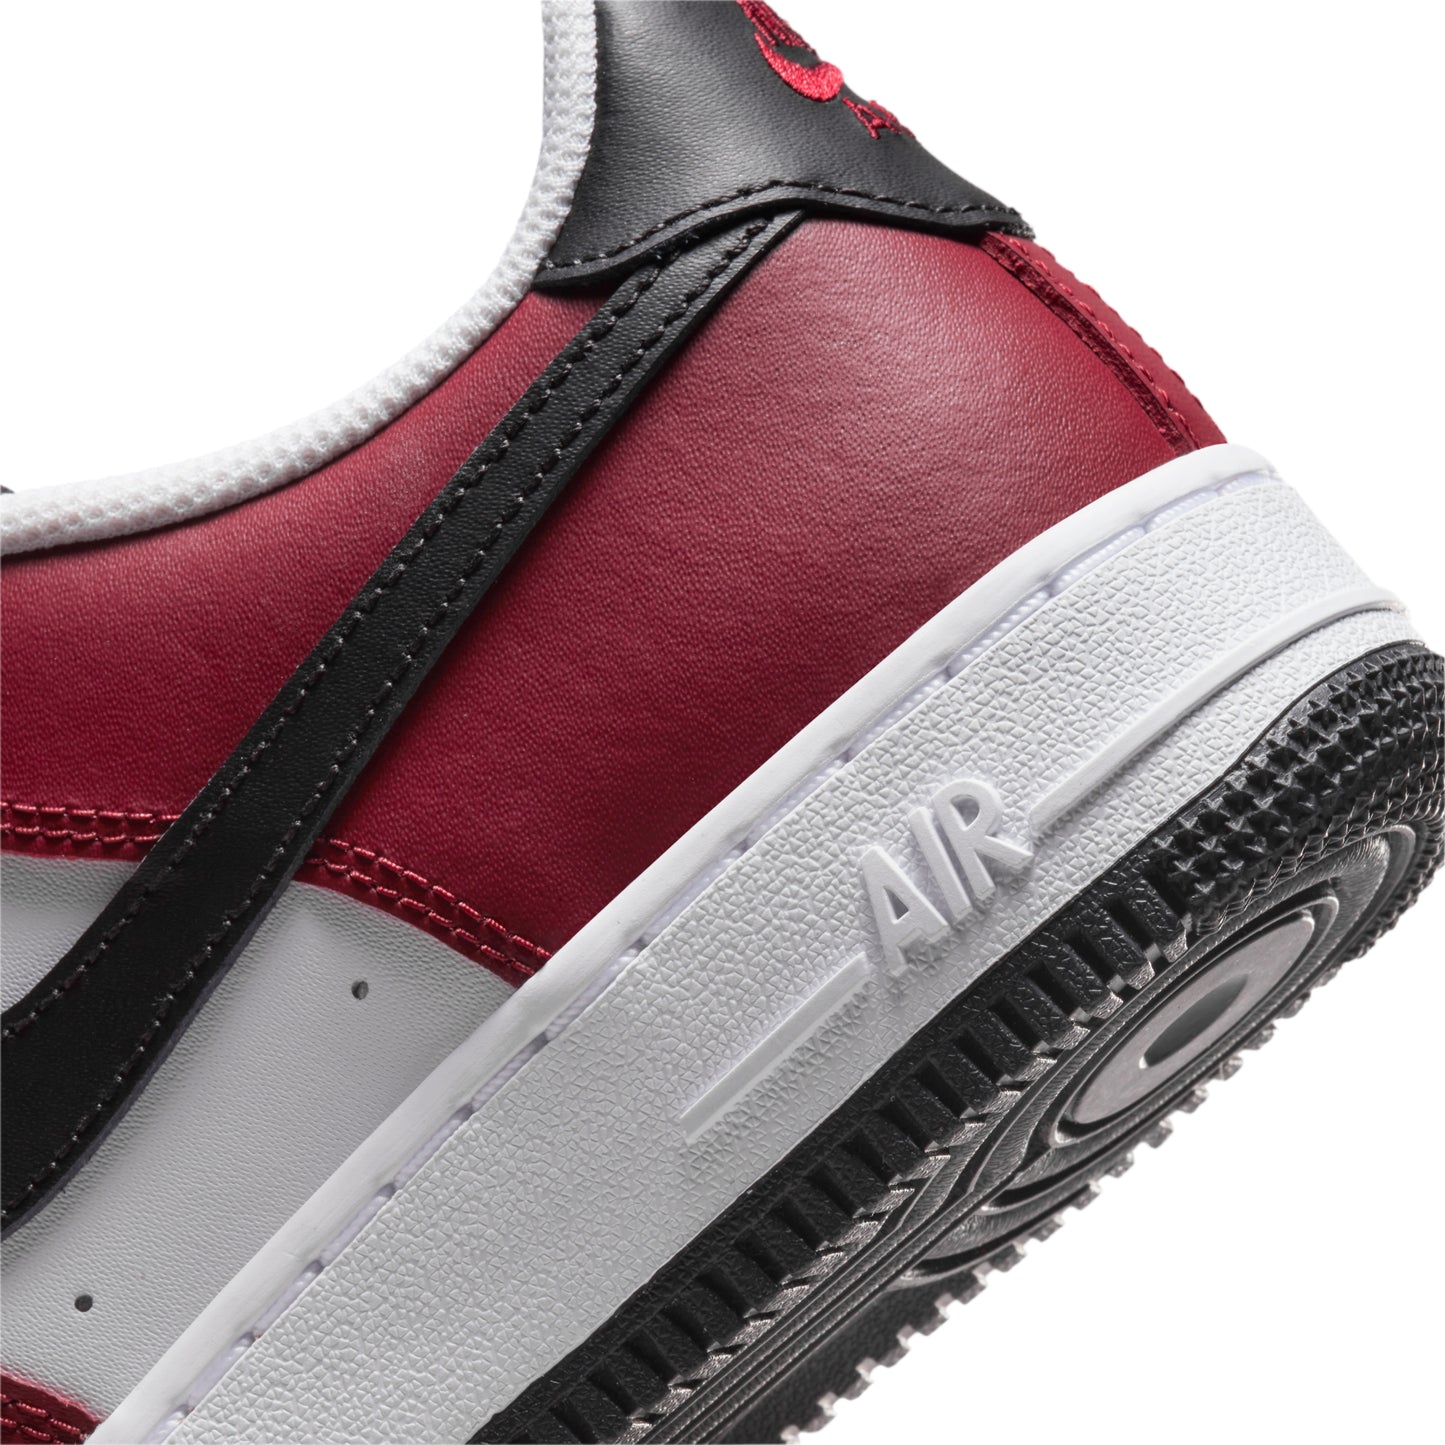 Nike Air Force 1 Low LV8 Team Red (GS)